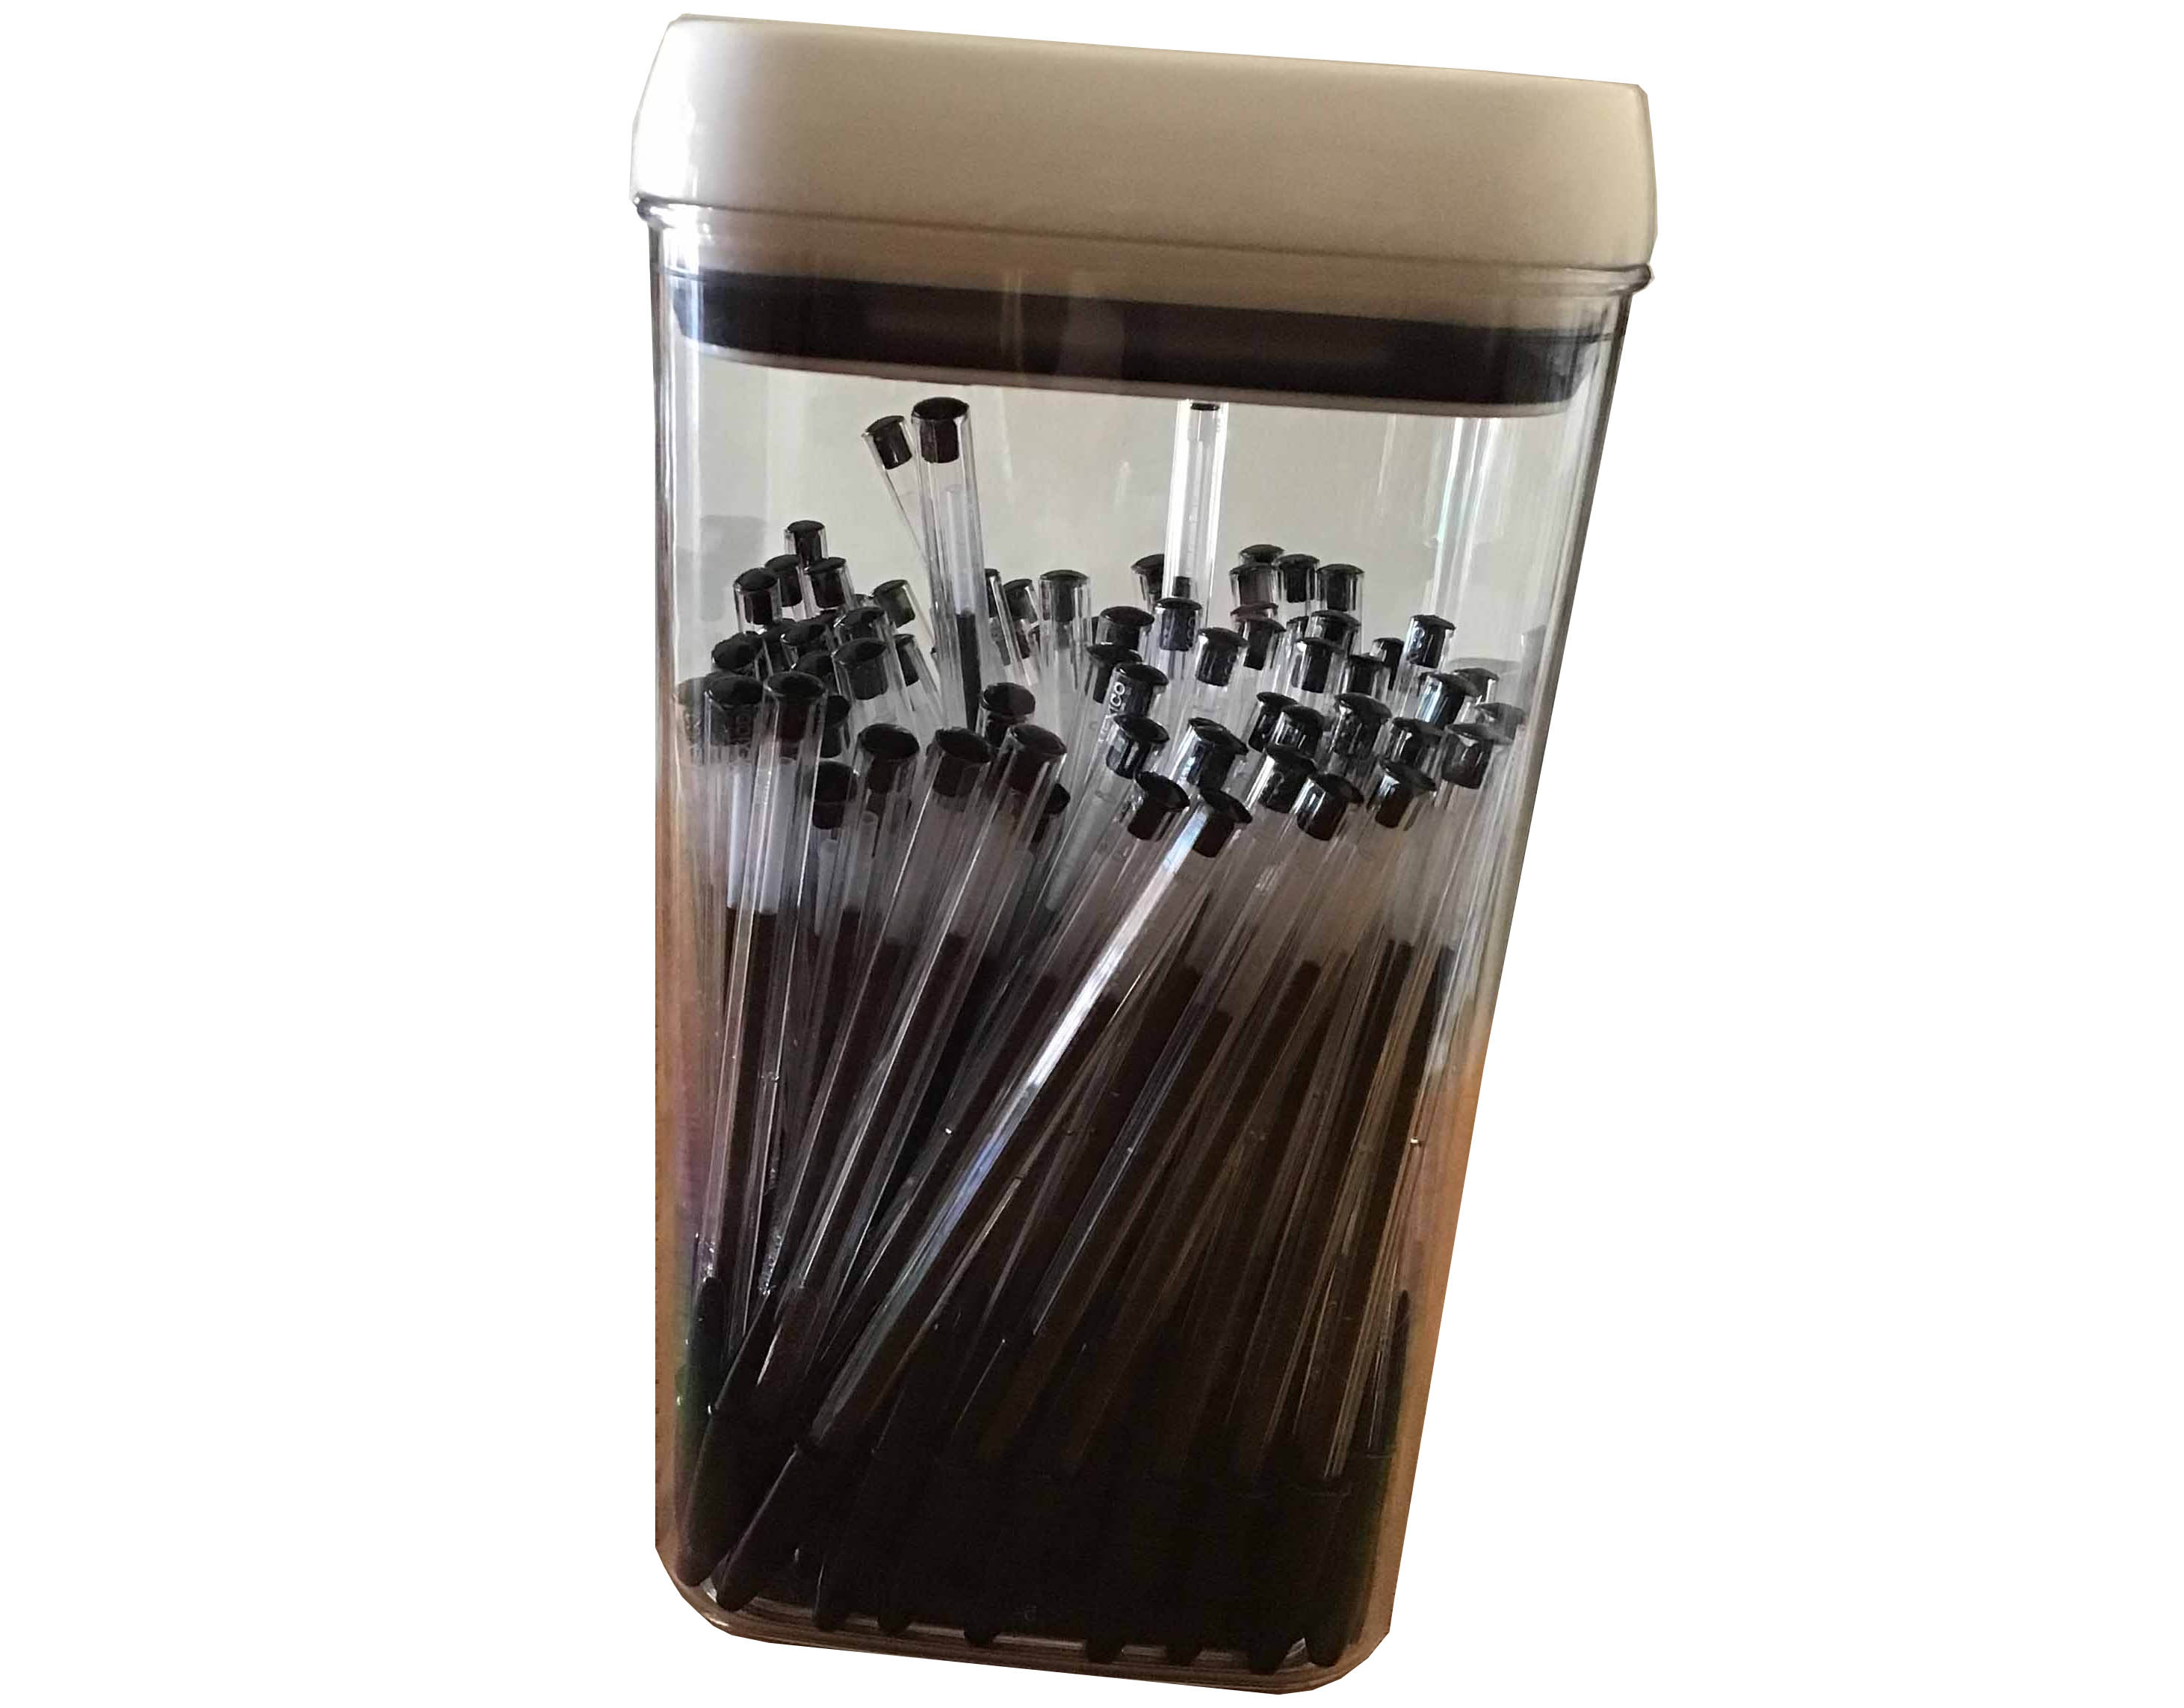 pens (100 black ink pens in container)